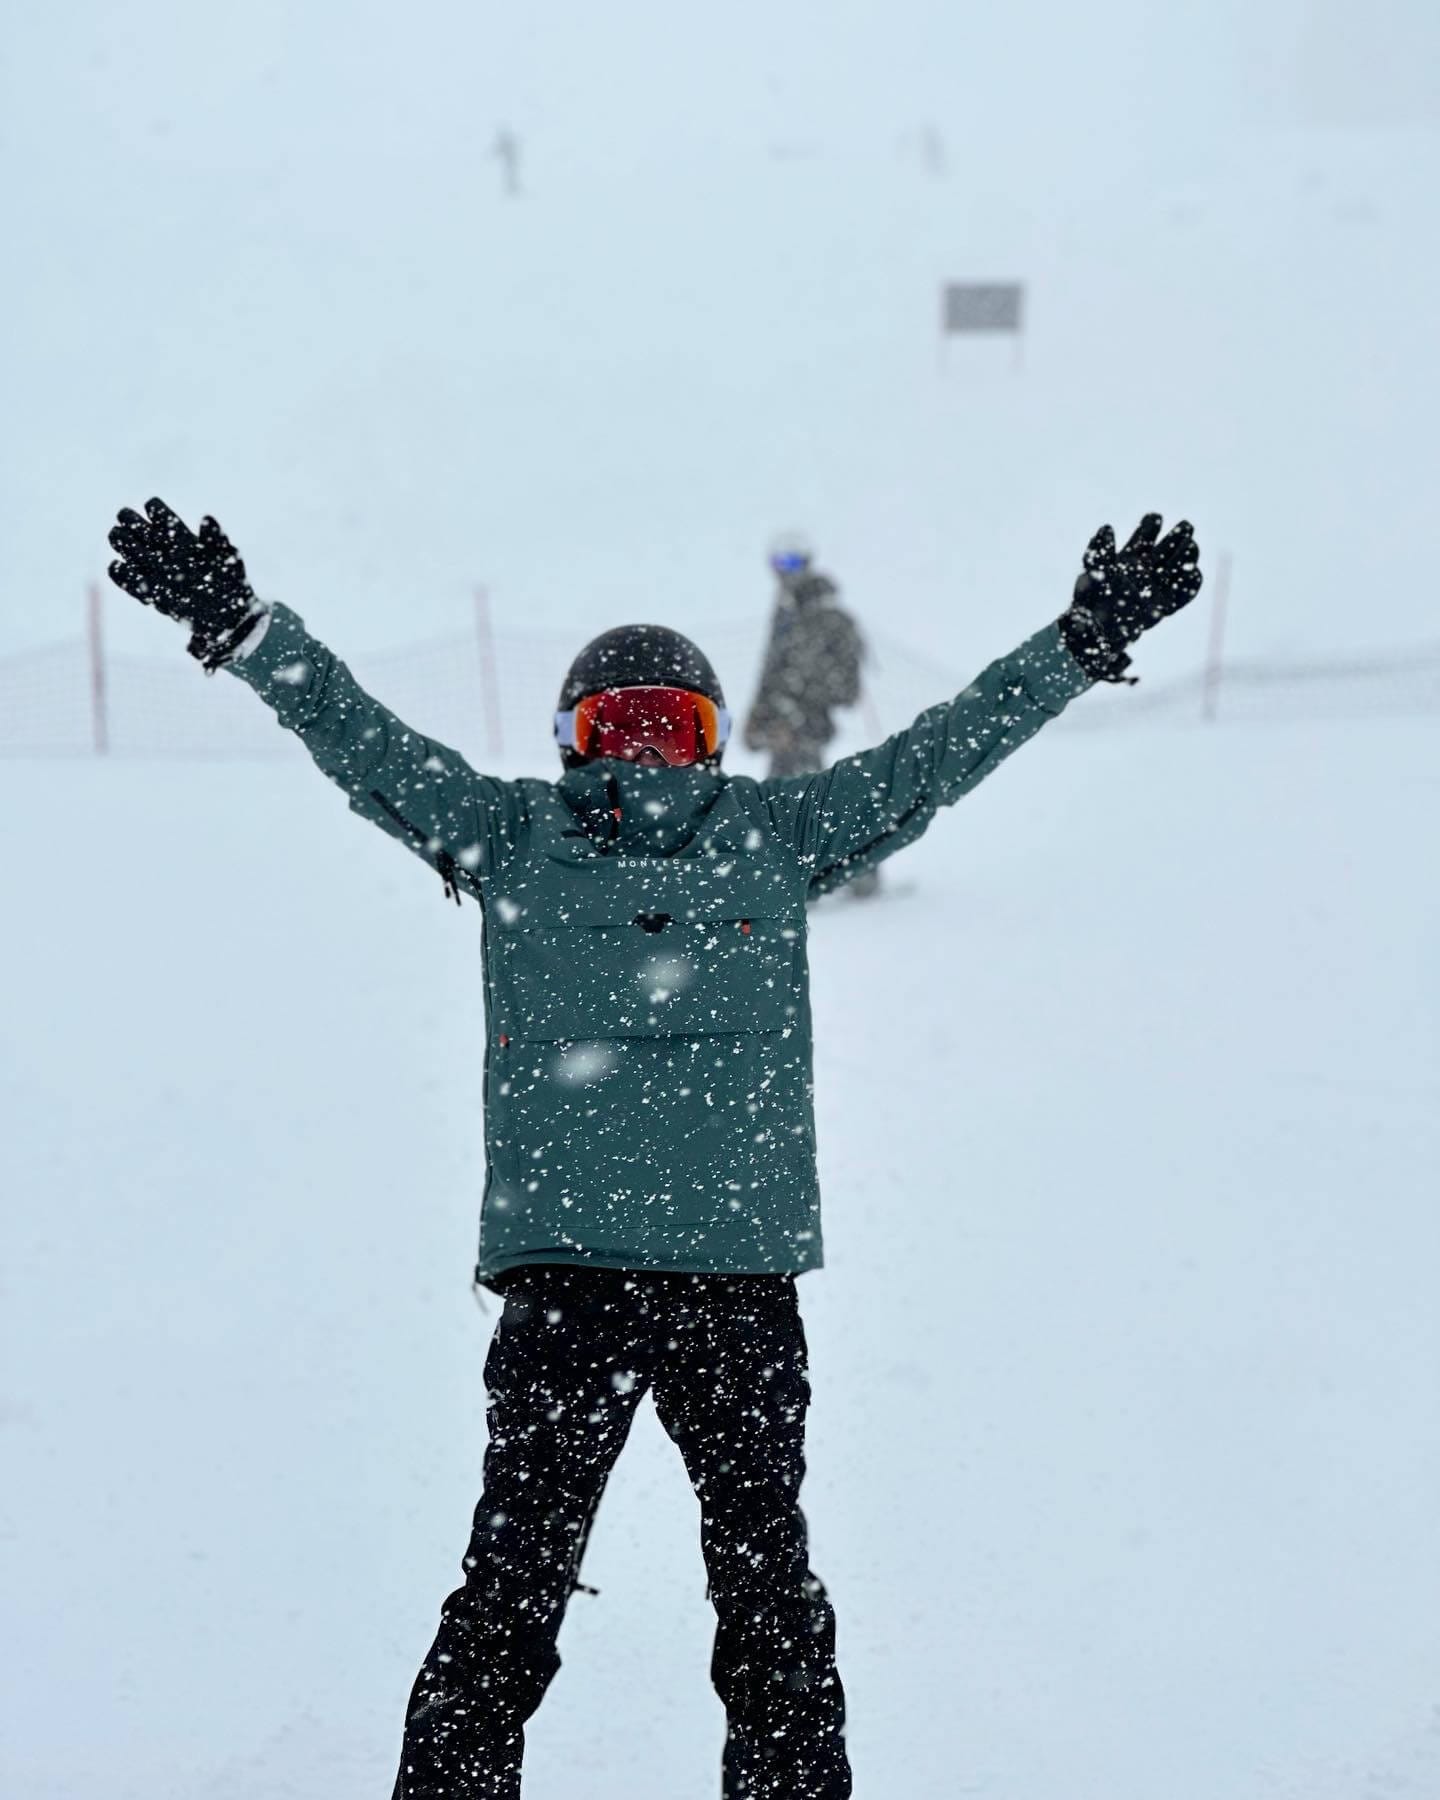 Jenna Felkey, wearing a snowboarding helmet, teal jacket, and black pants, poses with her arms up on snowy hill.